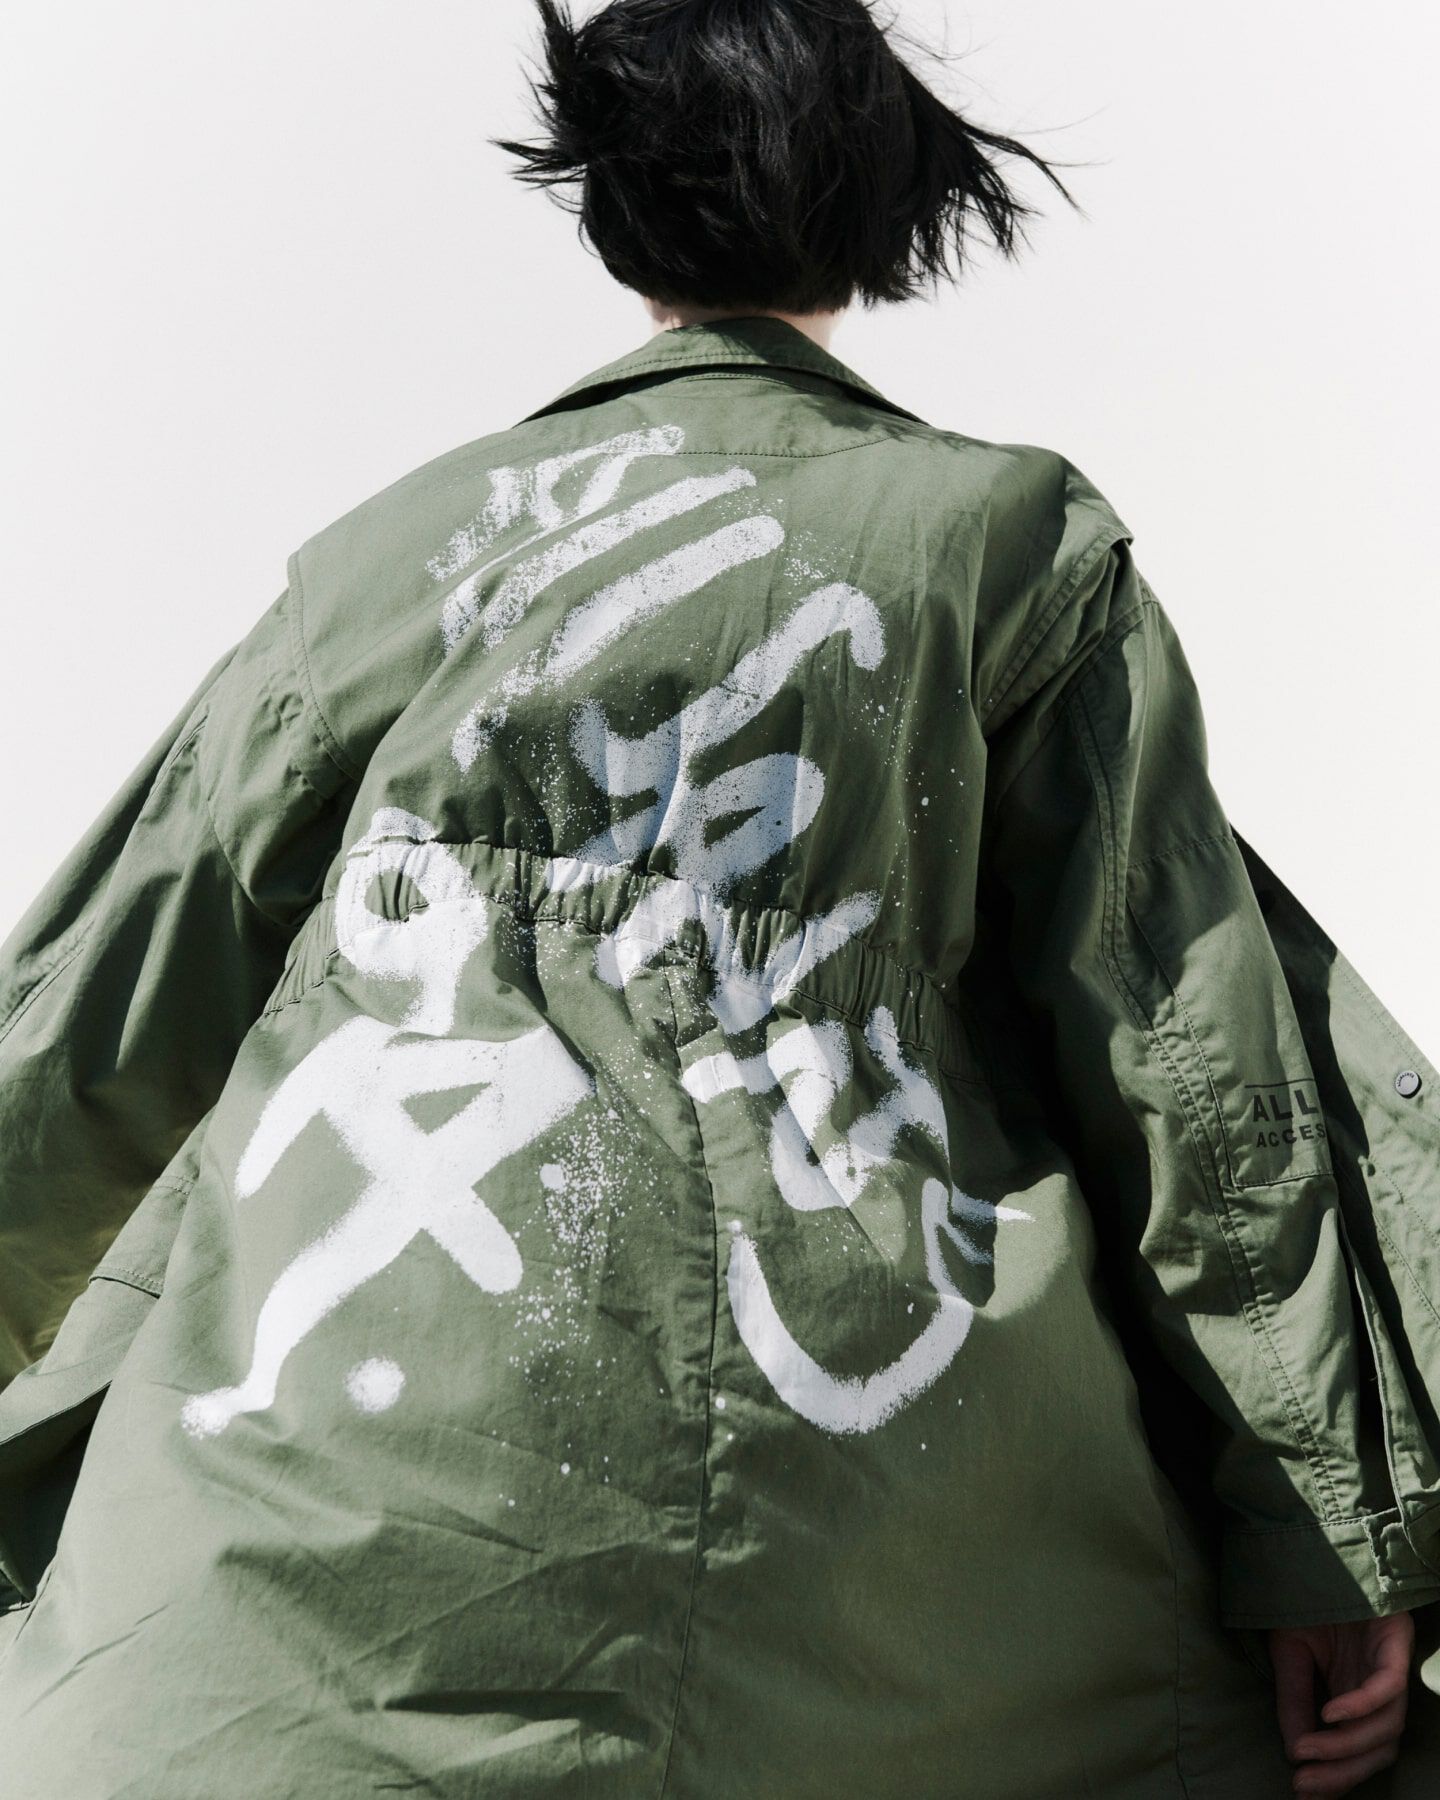 A woman wearing a light green jacket with AllSaints 94 spray painted on it in white